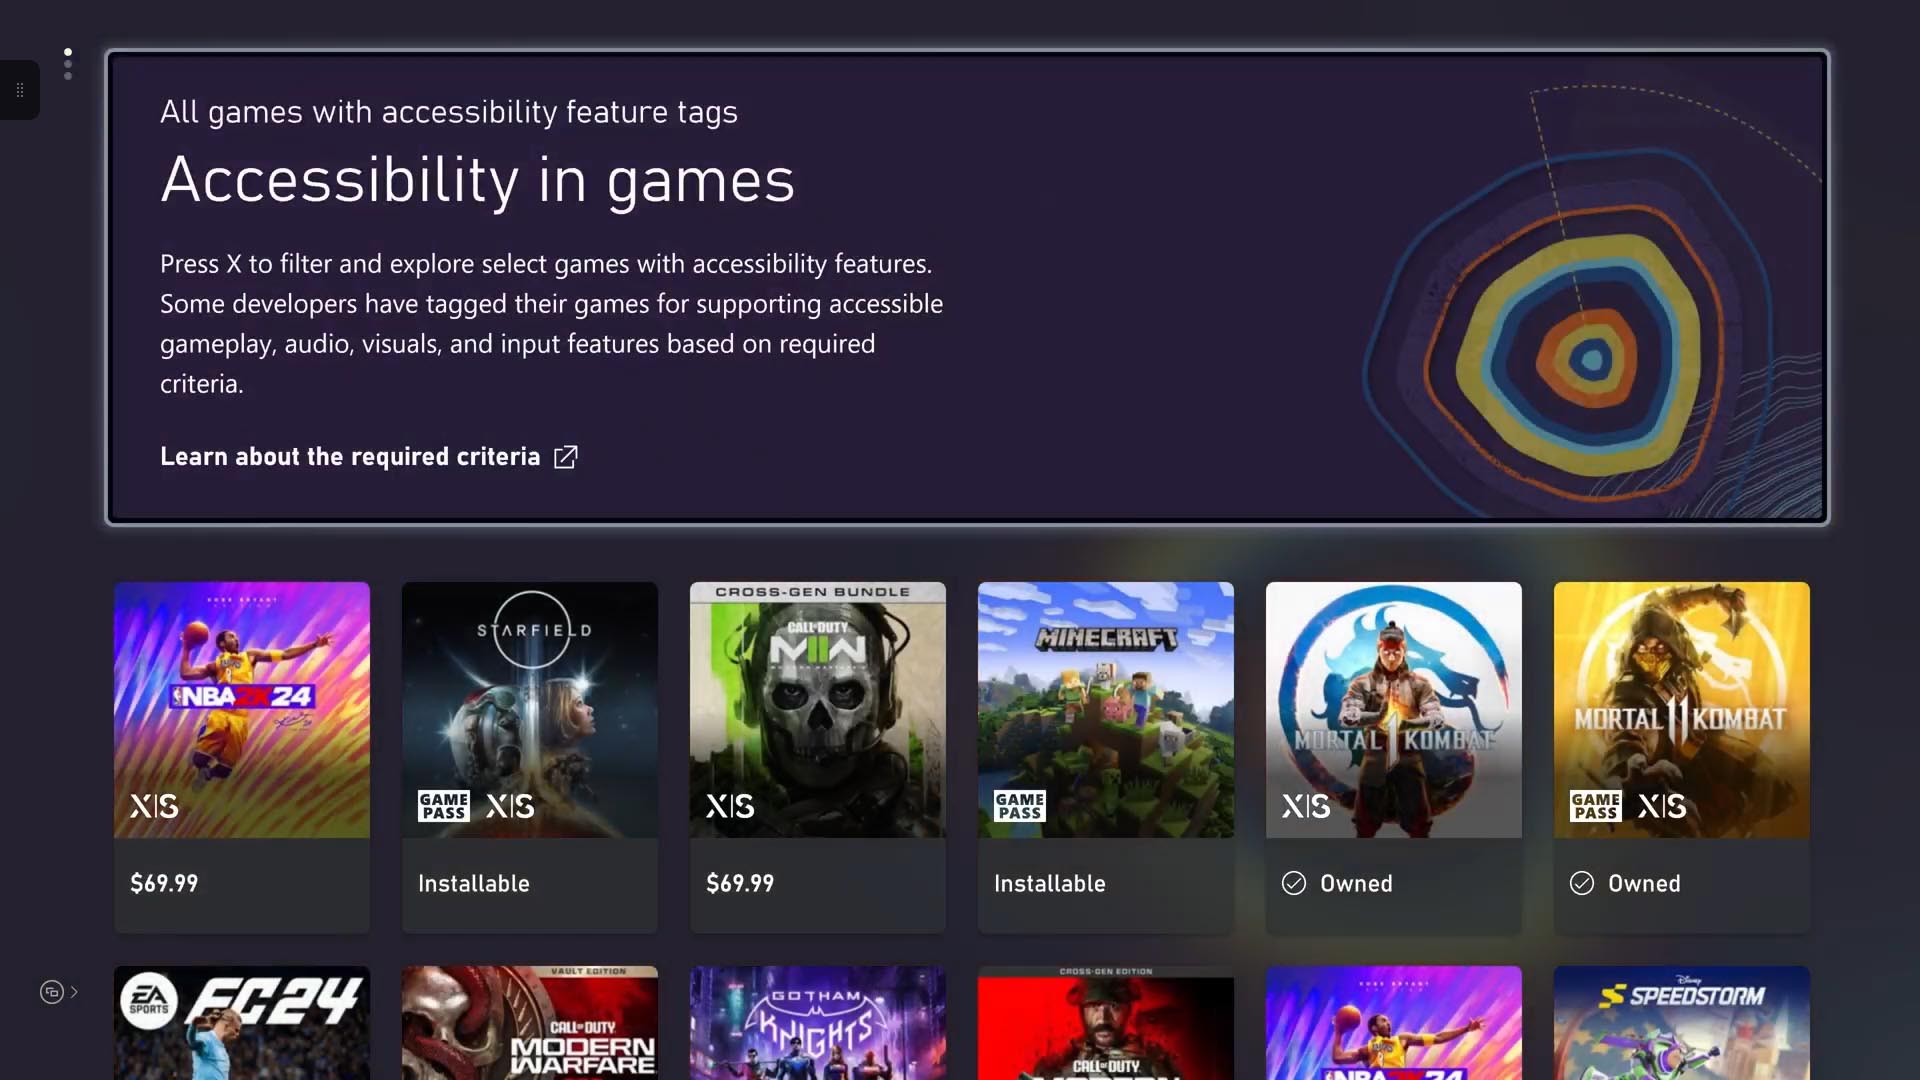 The ‘Accessibility in games’ channel is displayed on an Xbox console, with rows of small icons representing different games on Xbox that have Xbox Accessibility Feature Tags.